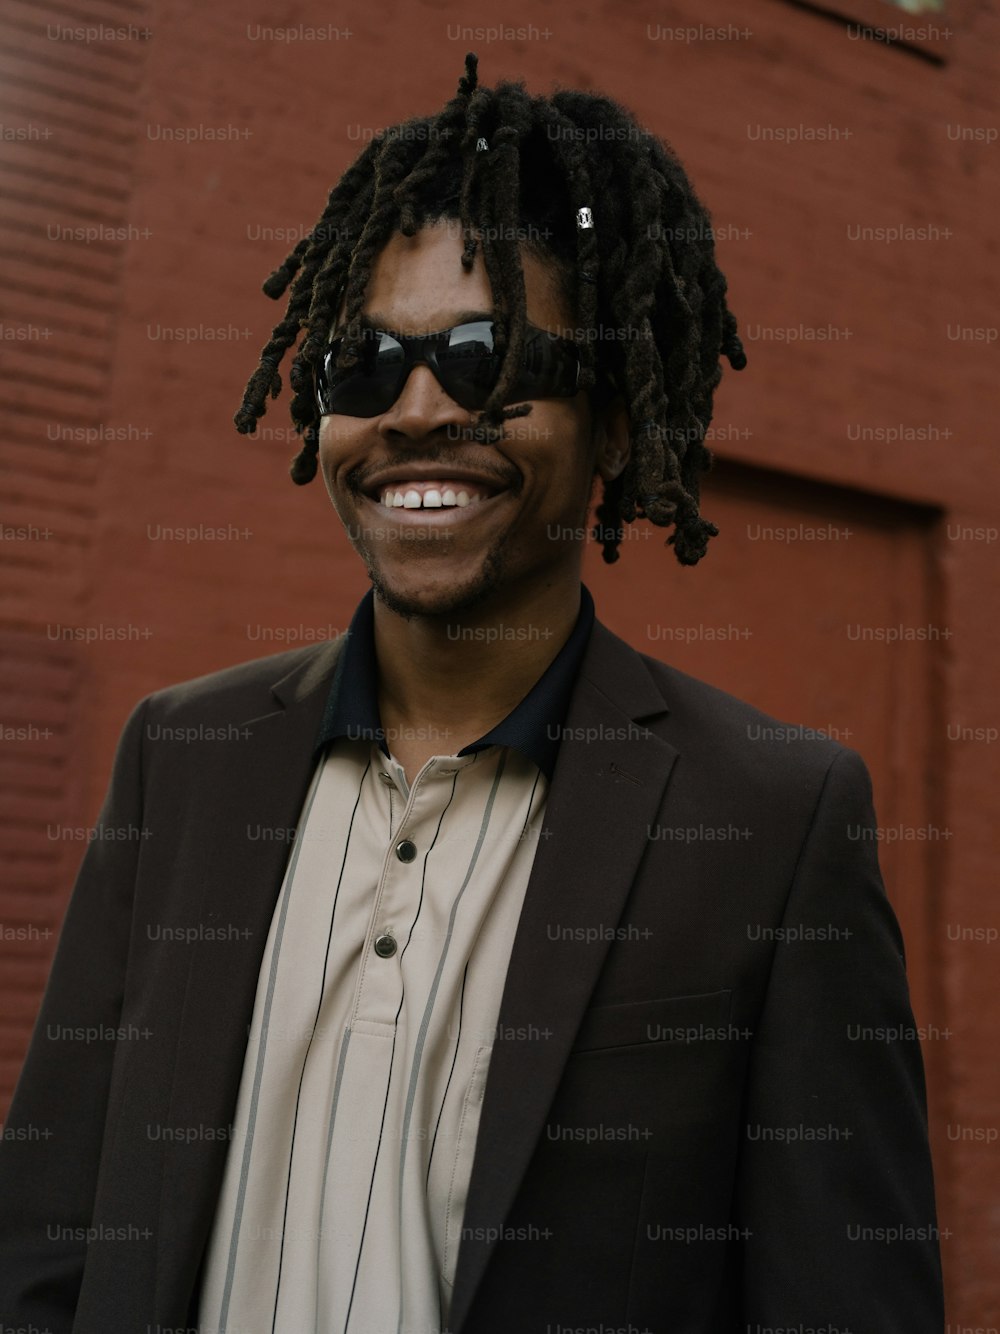 a man with dreadlocks wearing a suit and sunglasses